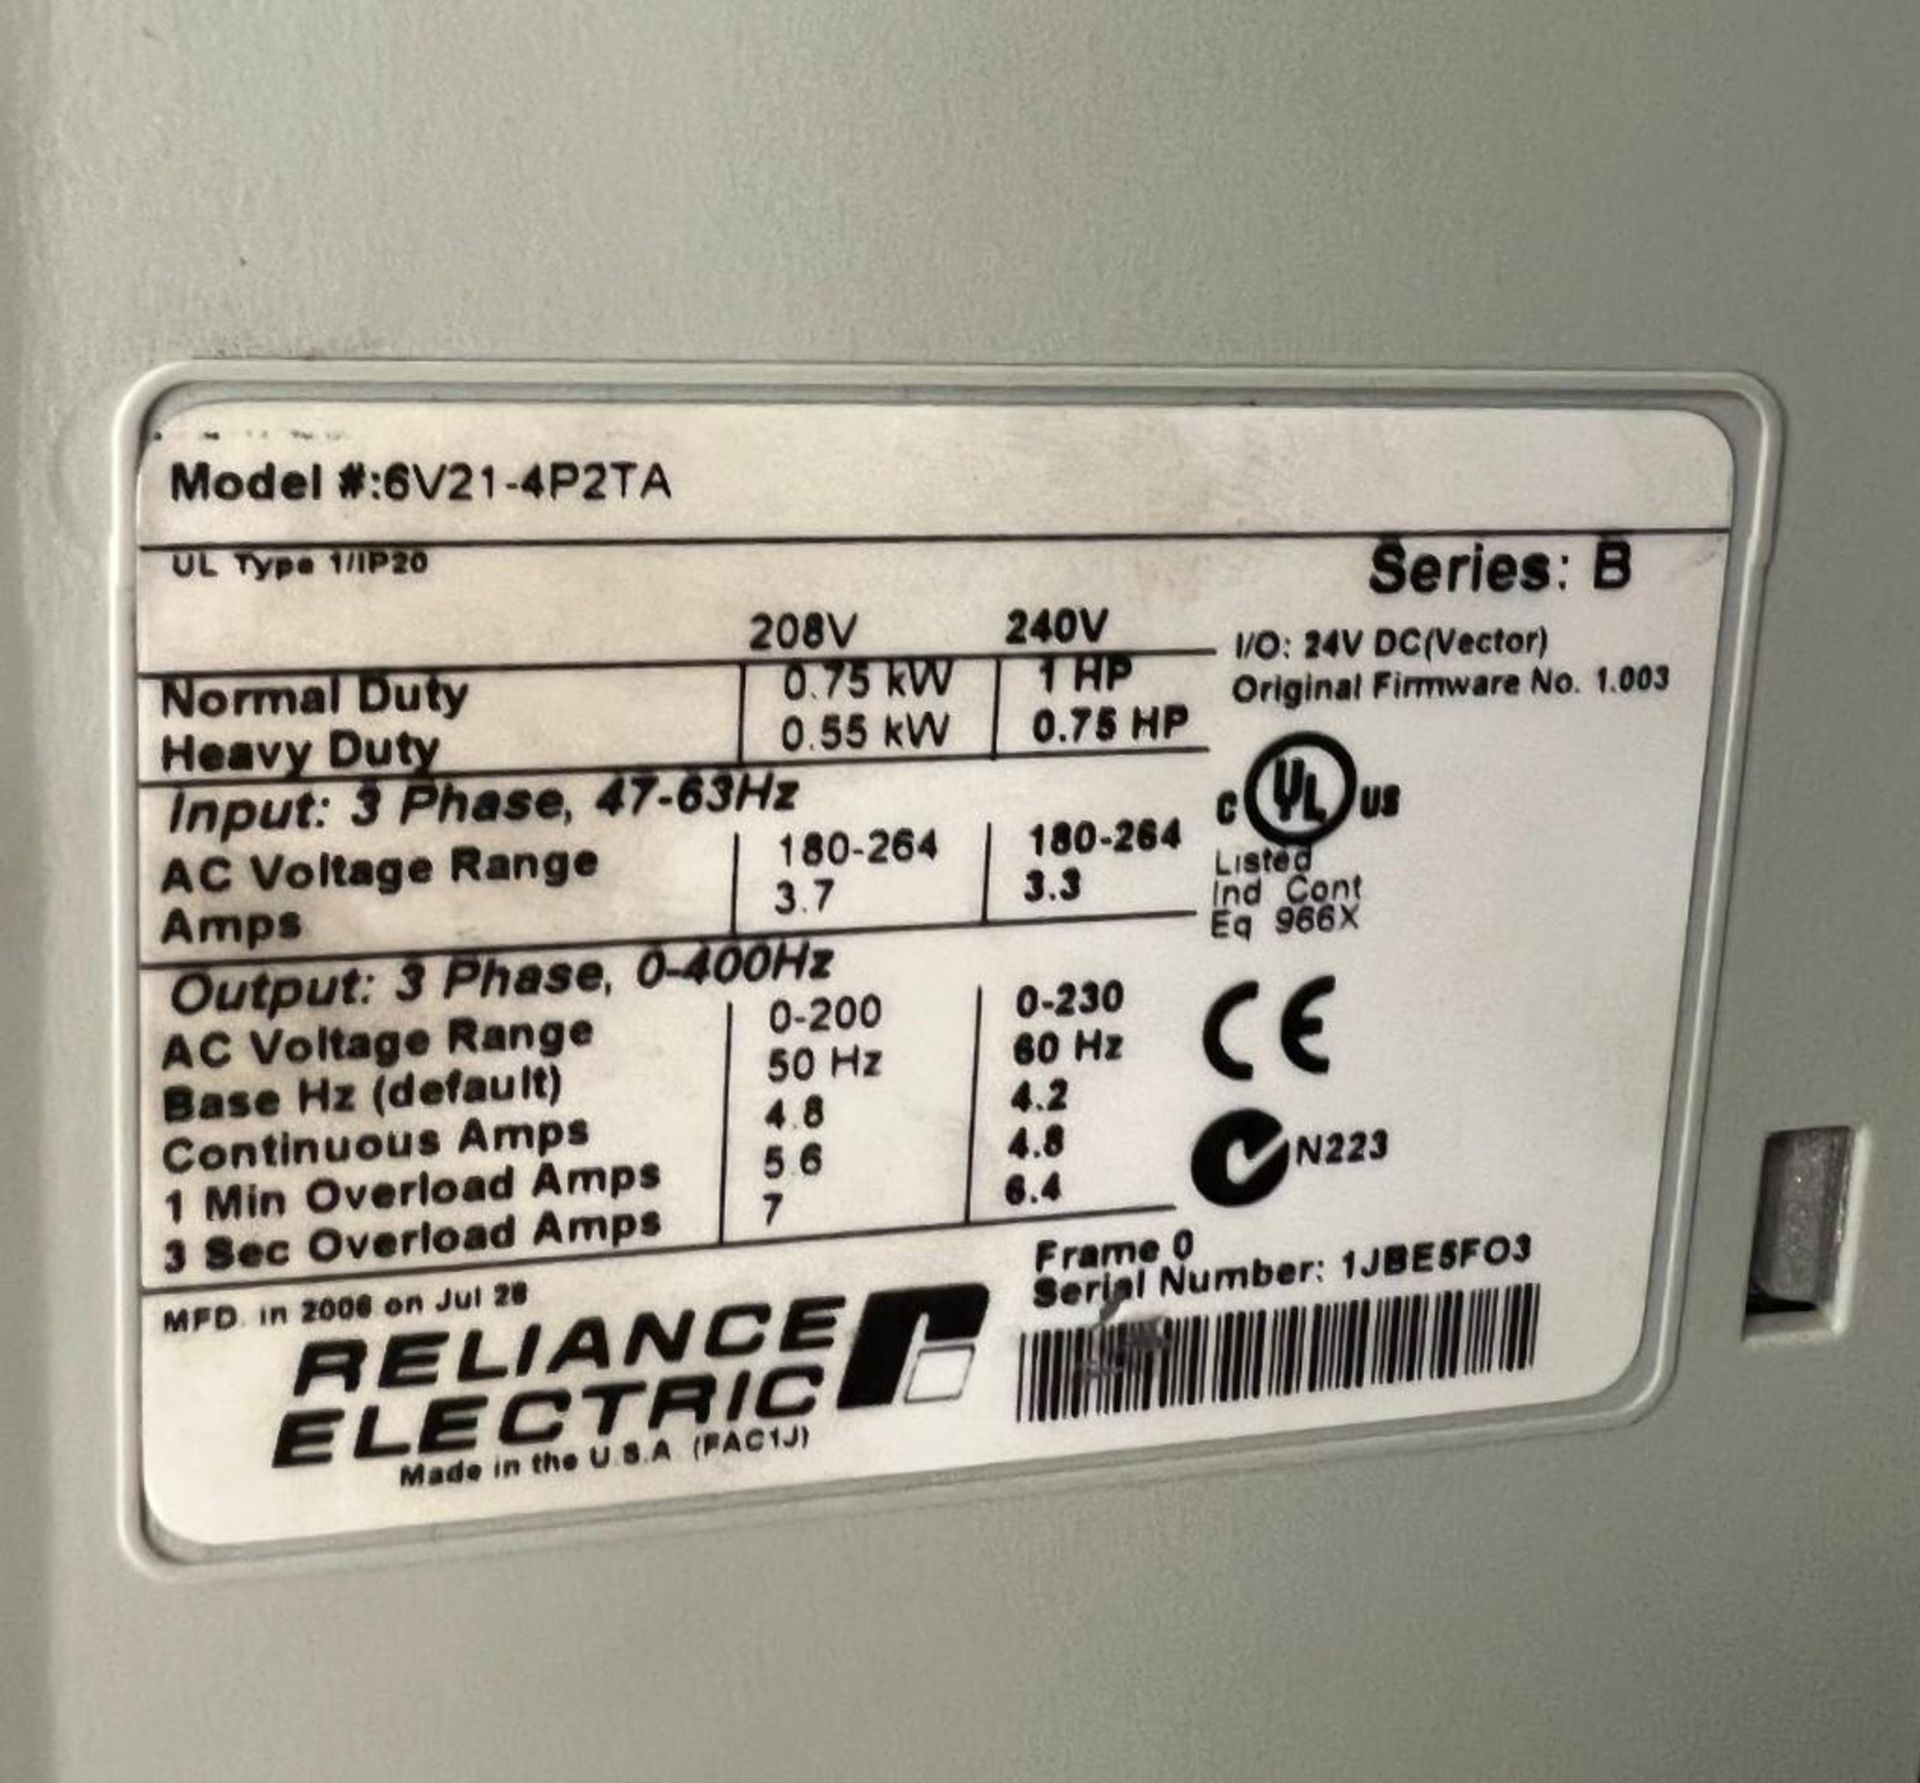 RELIANCE ELECTRIC FLOWSERVE IPS TEMPO, SERIES B, MODEL 6V21-4P2TA, 3-PH, 208/240V - Image 2 of 2